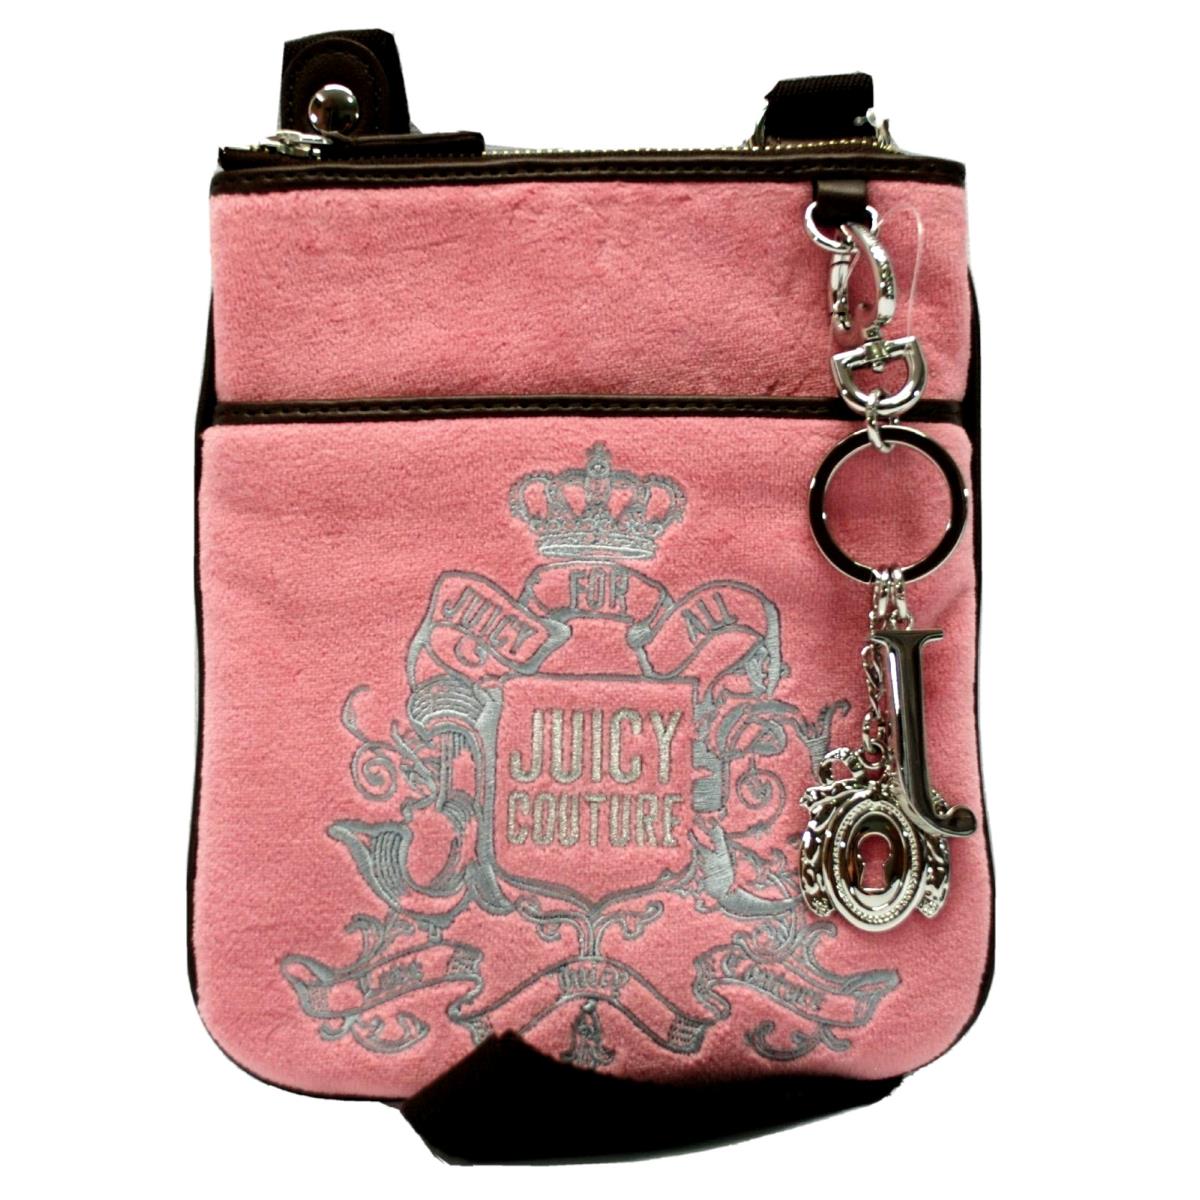 Juicy Couture Small Leather Demi Shoulder Handbag | Juicy Couture Handbags  | Bag Borrow or Steal